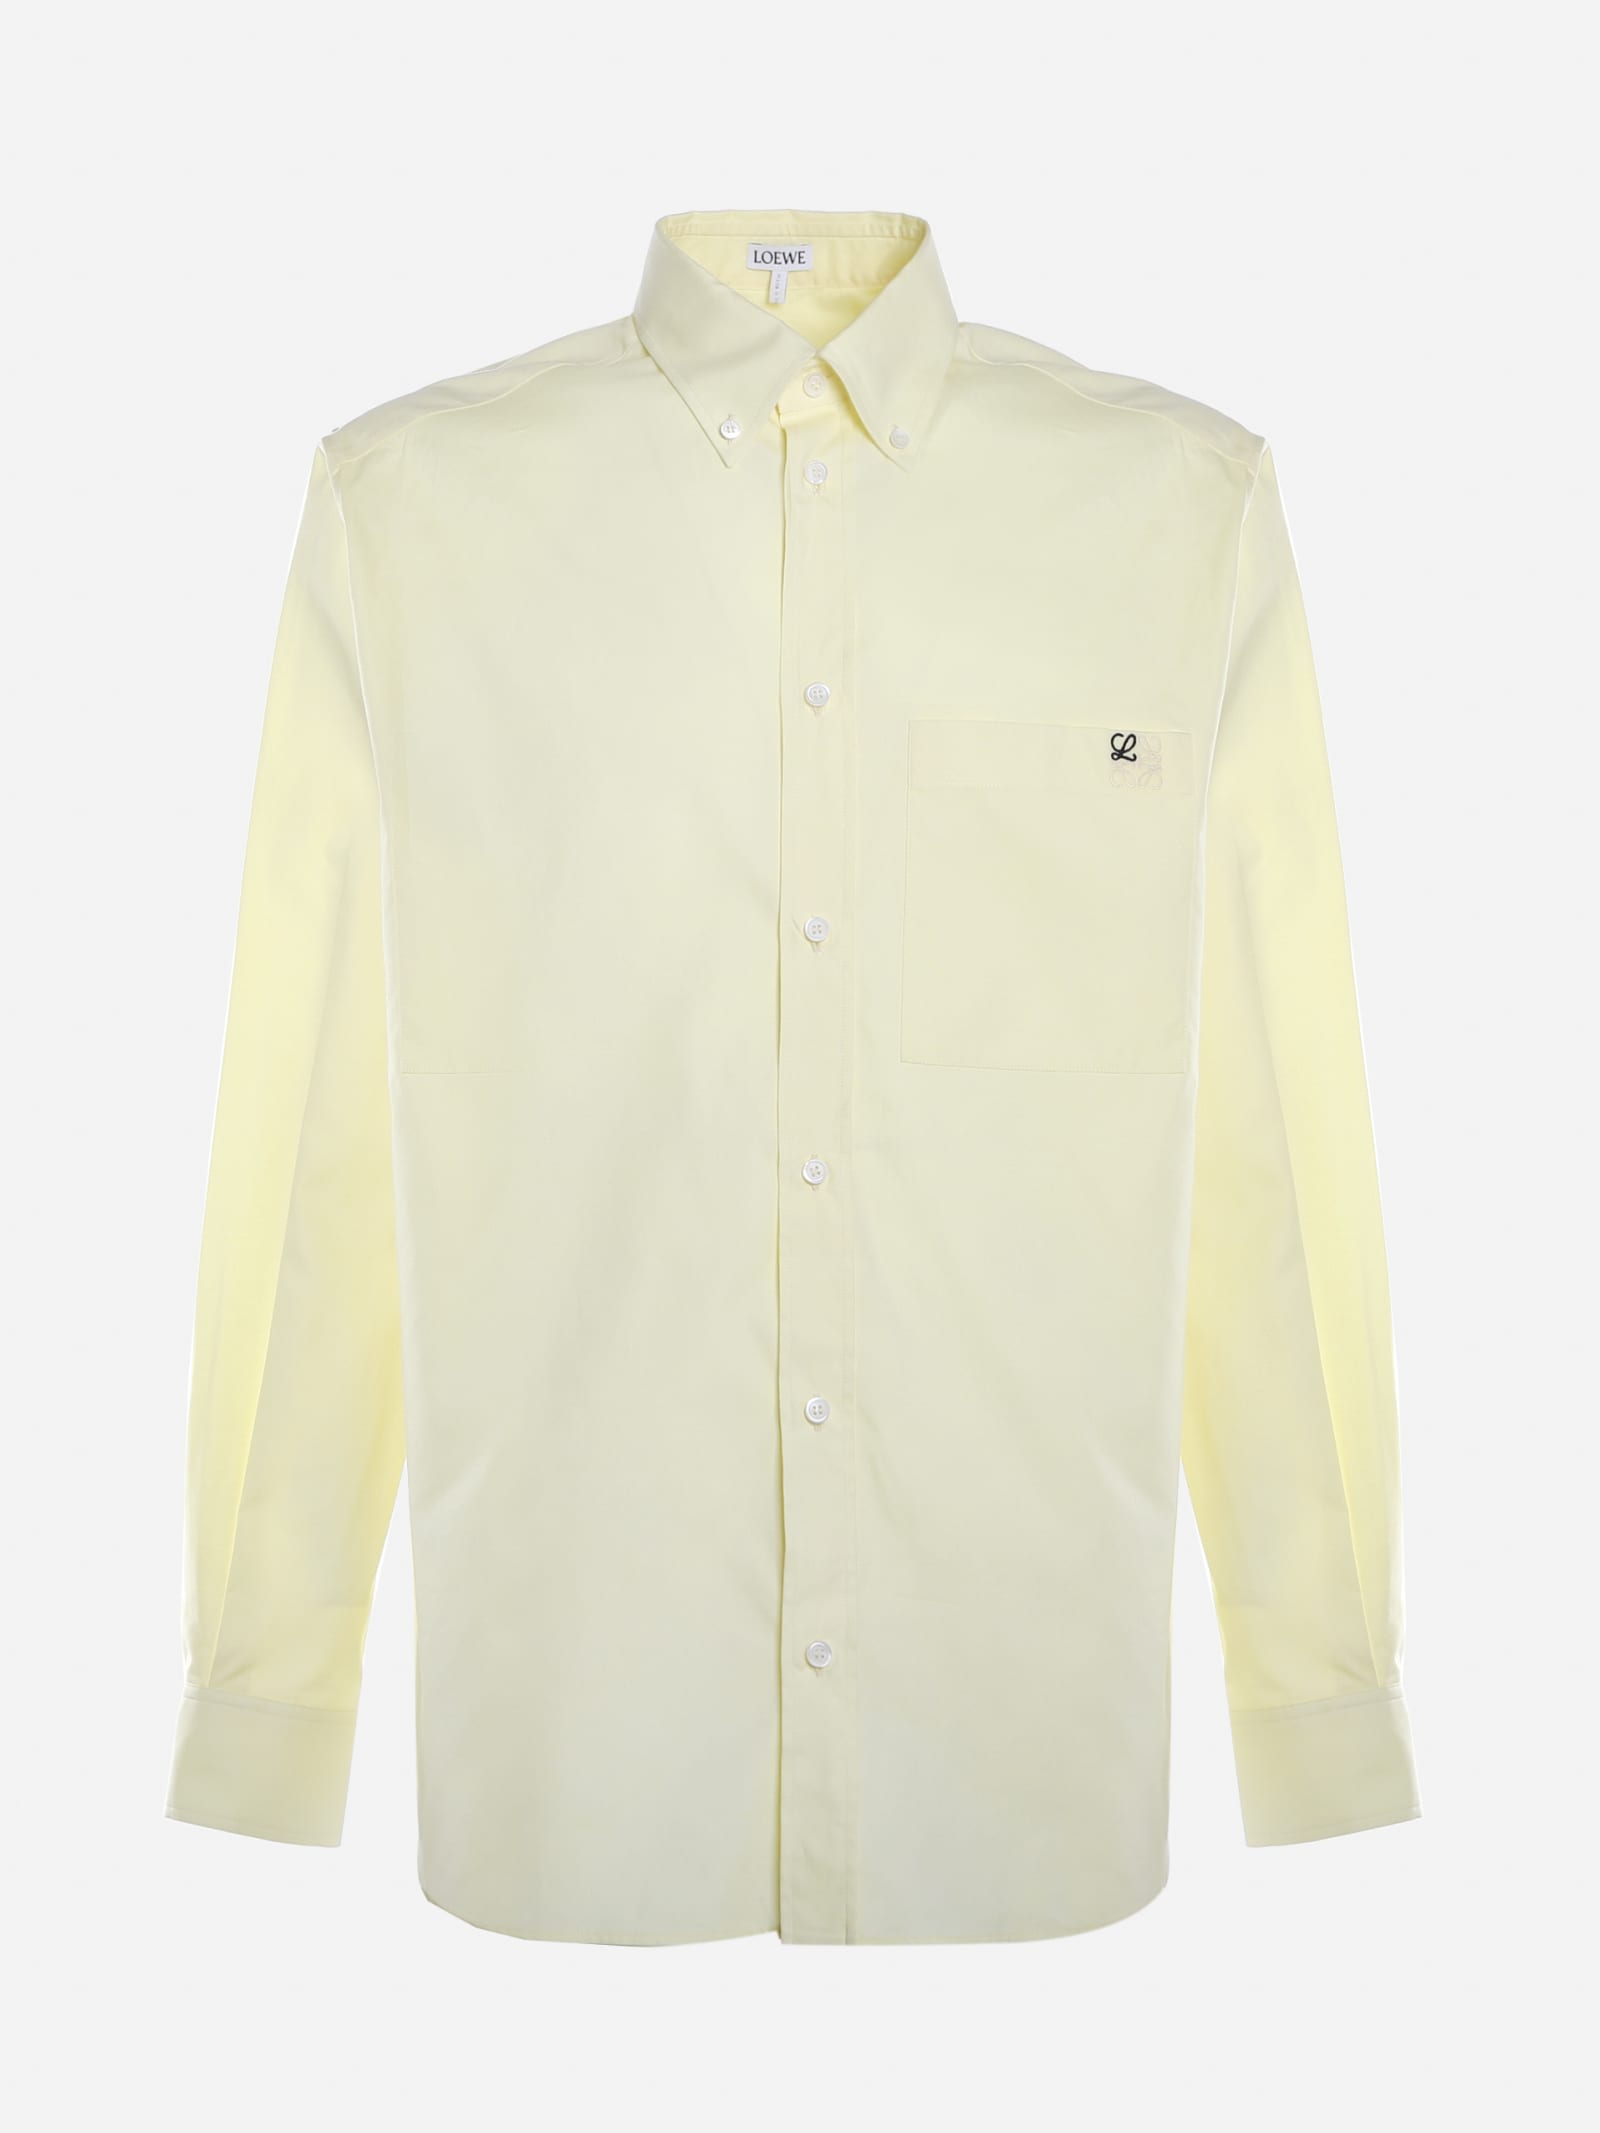 Loewe Cotton Shirt With Embroidered Anagram